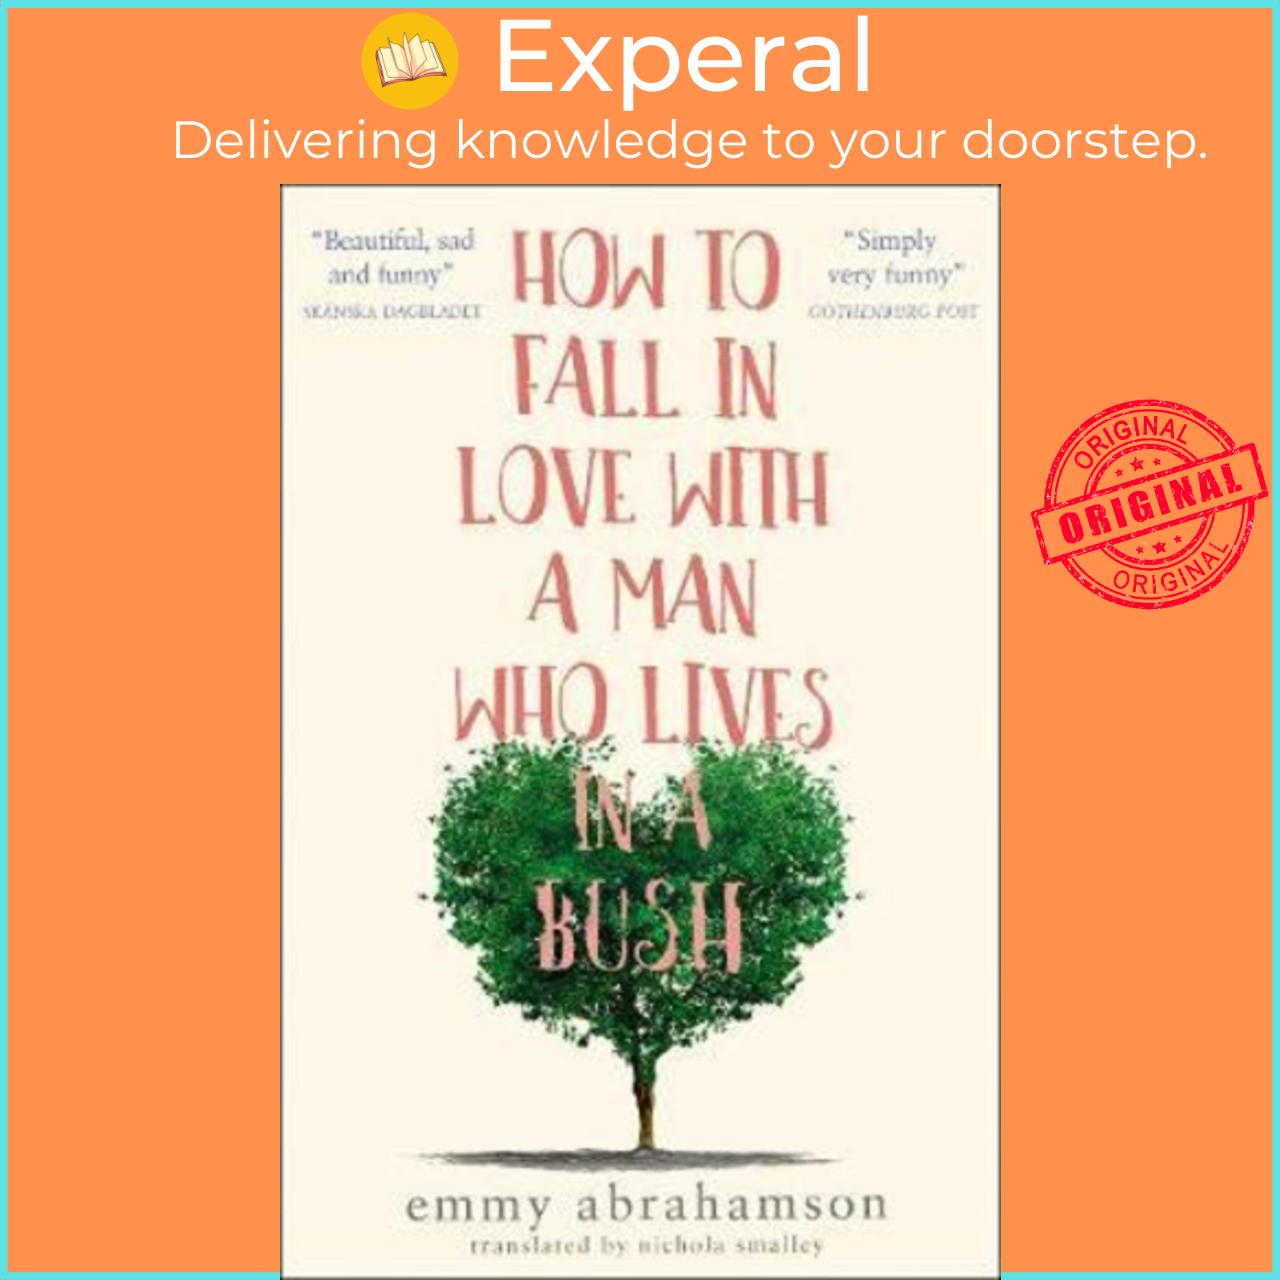 Sách - How to Fall in Love with a Man Who Lives in a Bush by Emmy Abrahamson (UK edition, paperback)